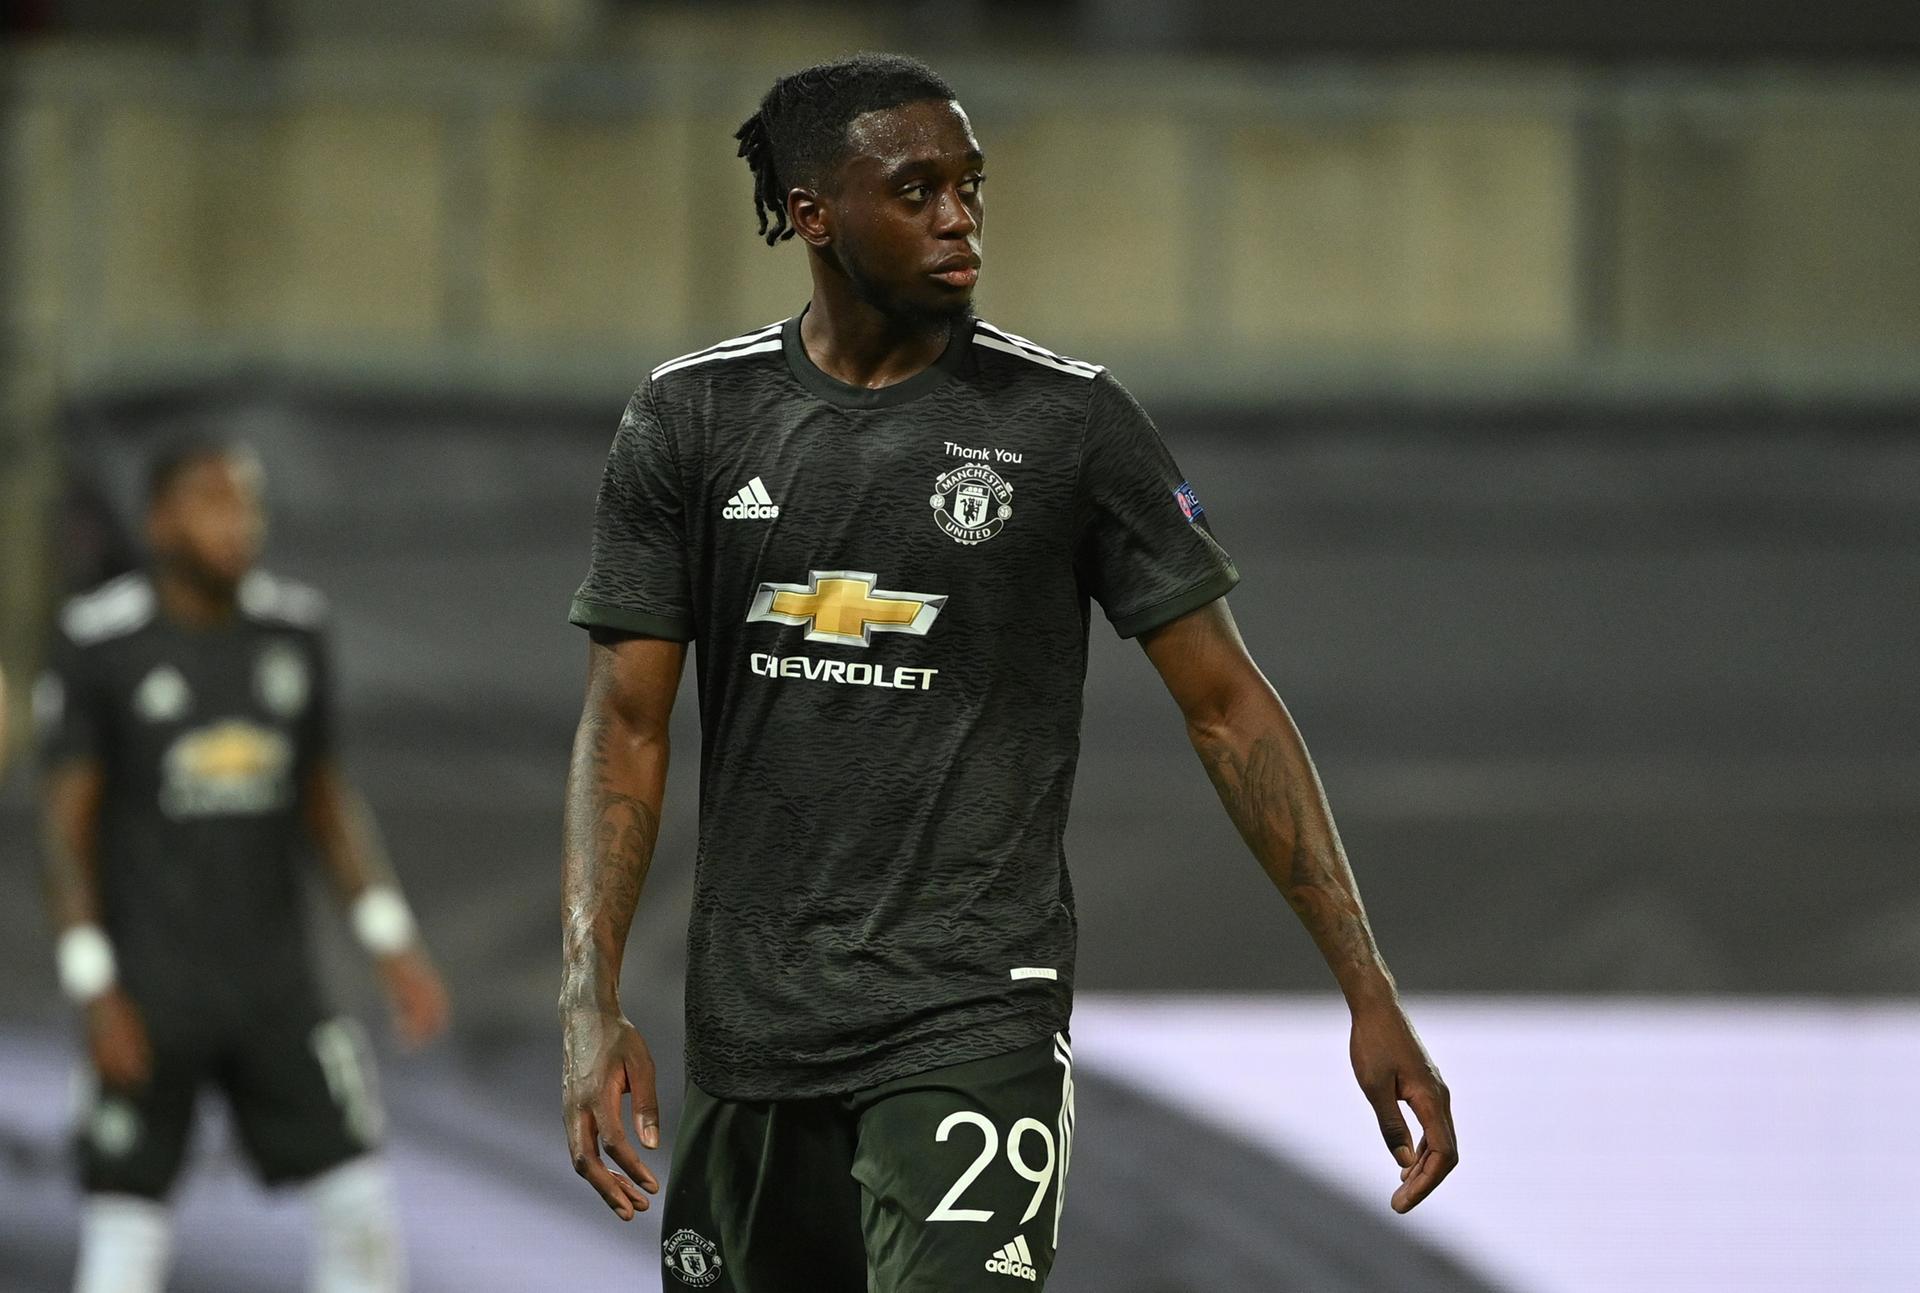 Aaron Wan-Bissaka - 7. His first season for United and he made more tackles than any other player as he started 45 matches and stayed injury free. It is almost impossible to get past him and the Londoner settled well, which isn’t easy. But he needs to improve his positioning, crossing and distribution if he’s to become a top full-back. An understanding with a quality winger in front of him would help, but until that happens we’ll still see the former Palace defender come inside with limited effect when United attack. Reuters